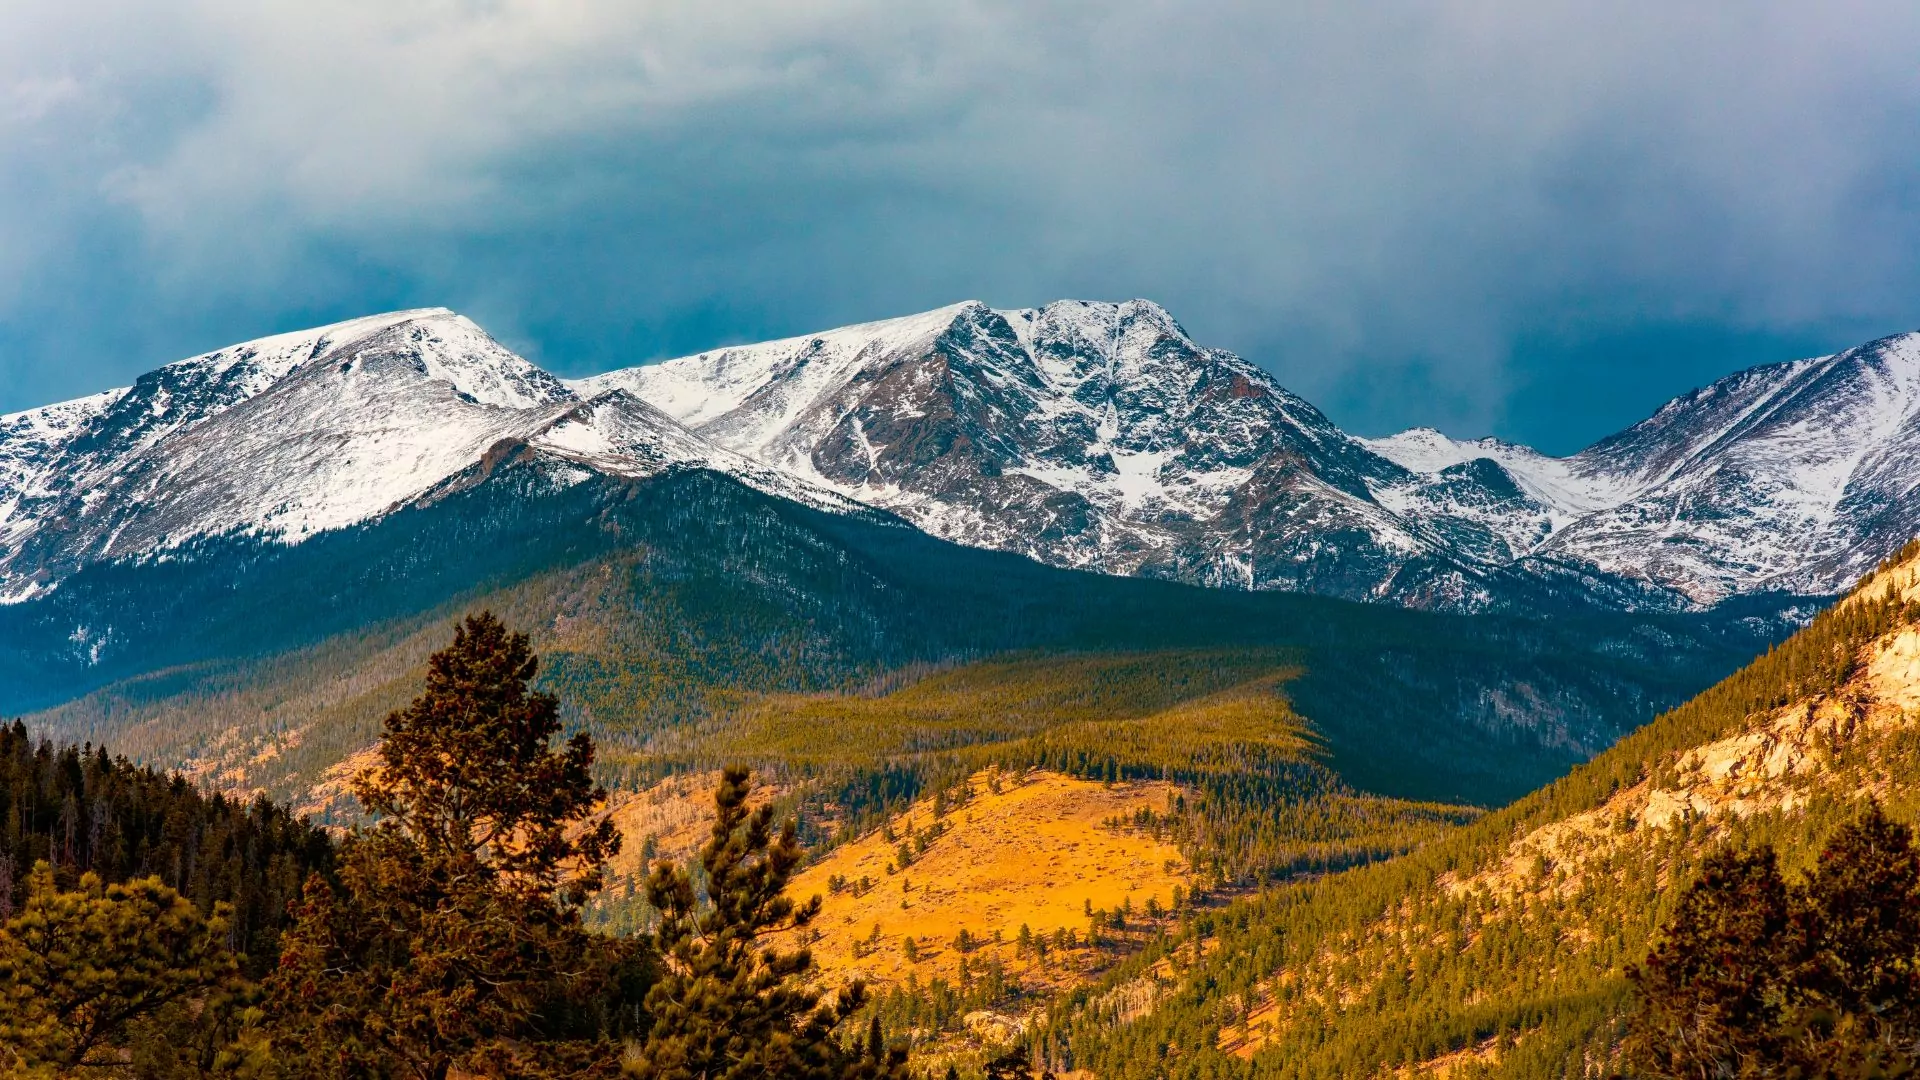 Snow covered Rocky Mountains in the Colorad